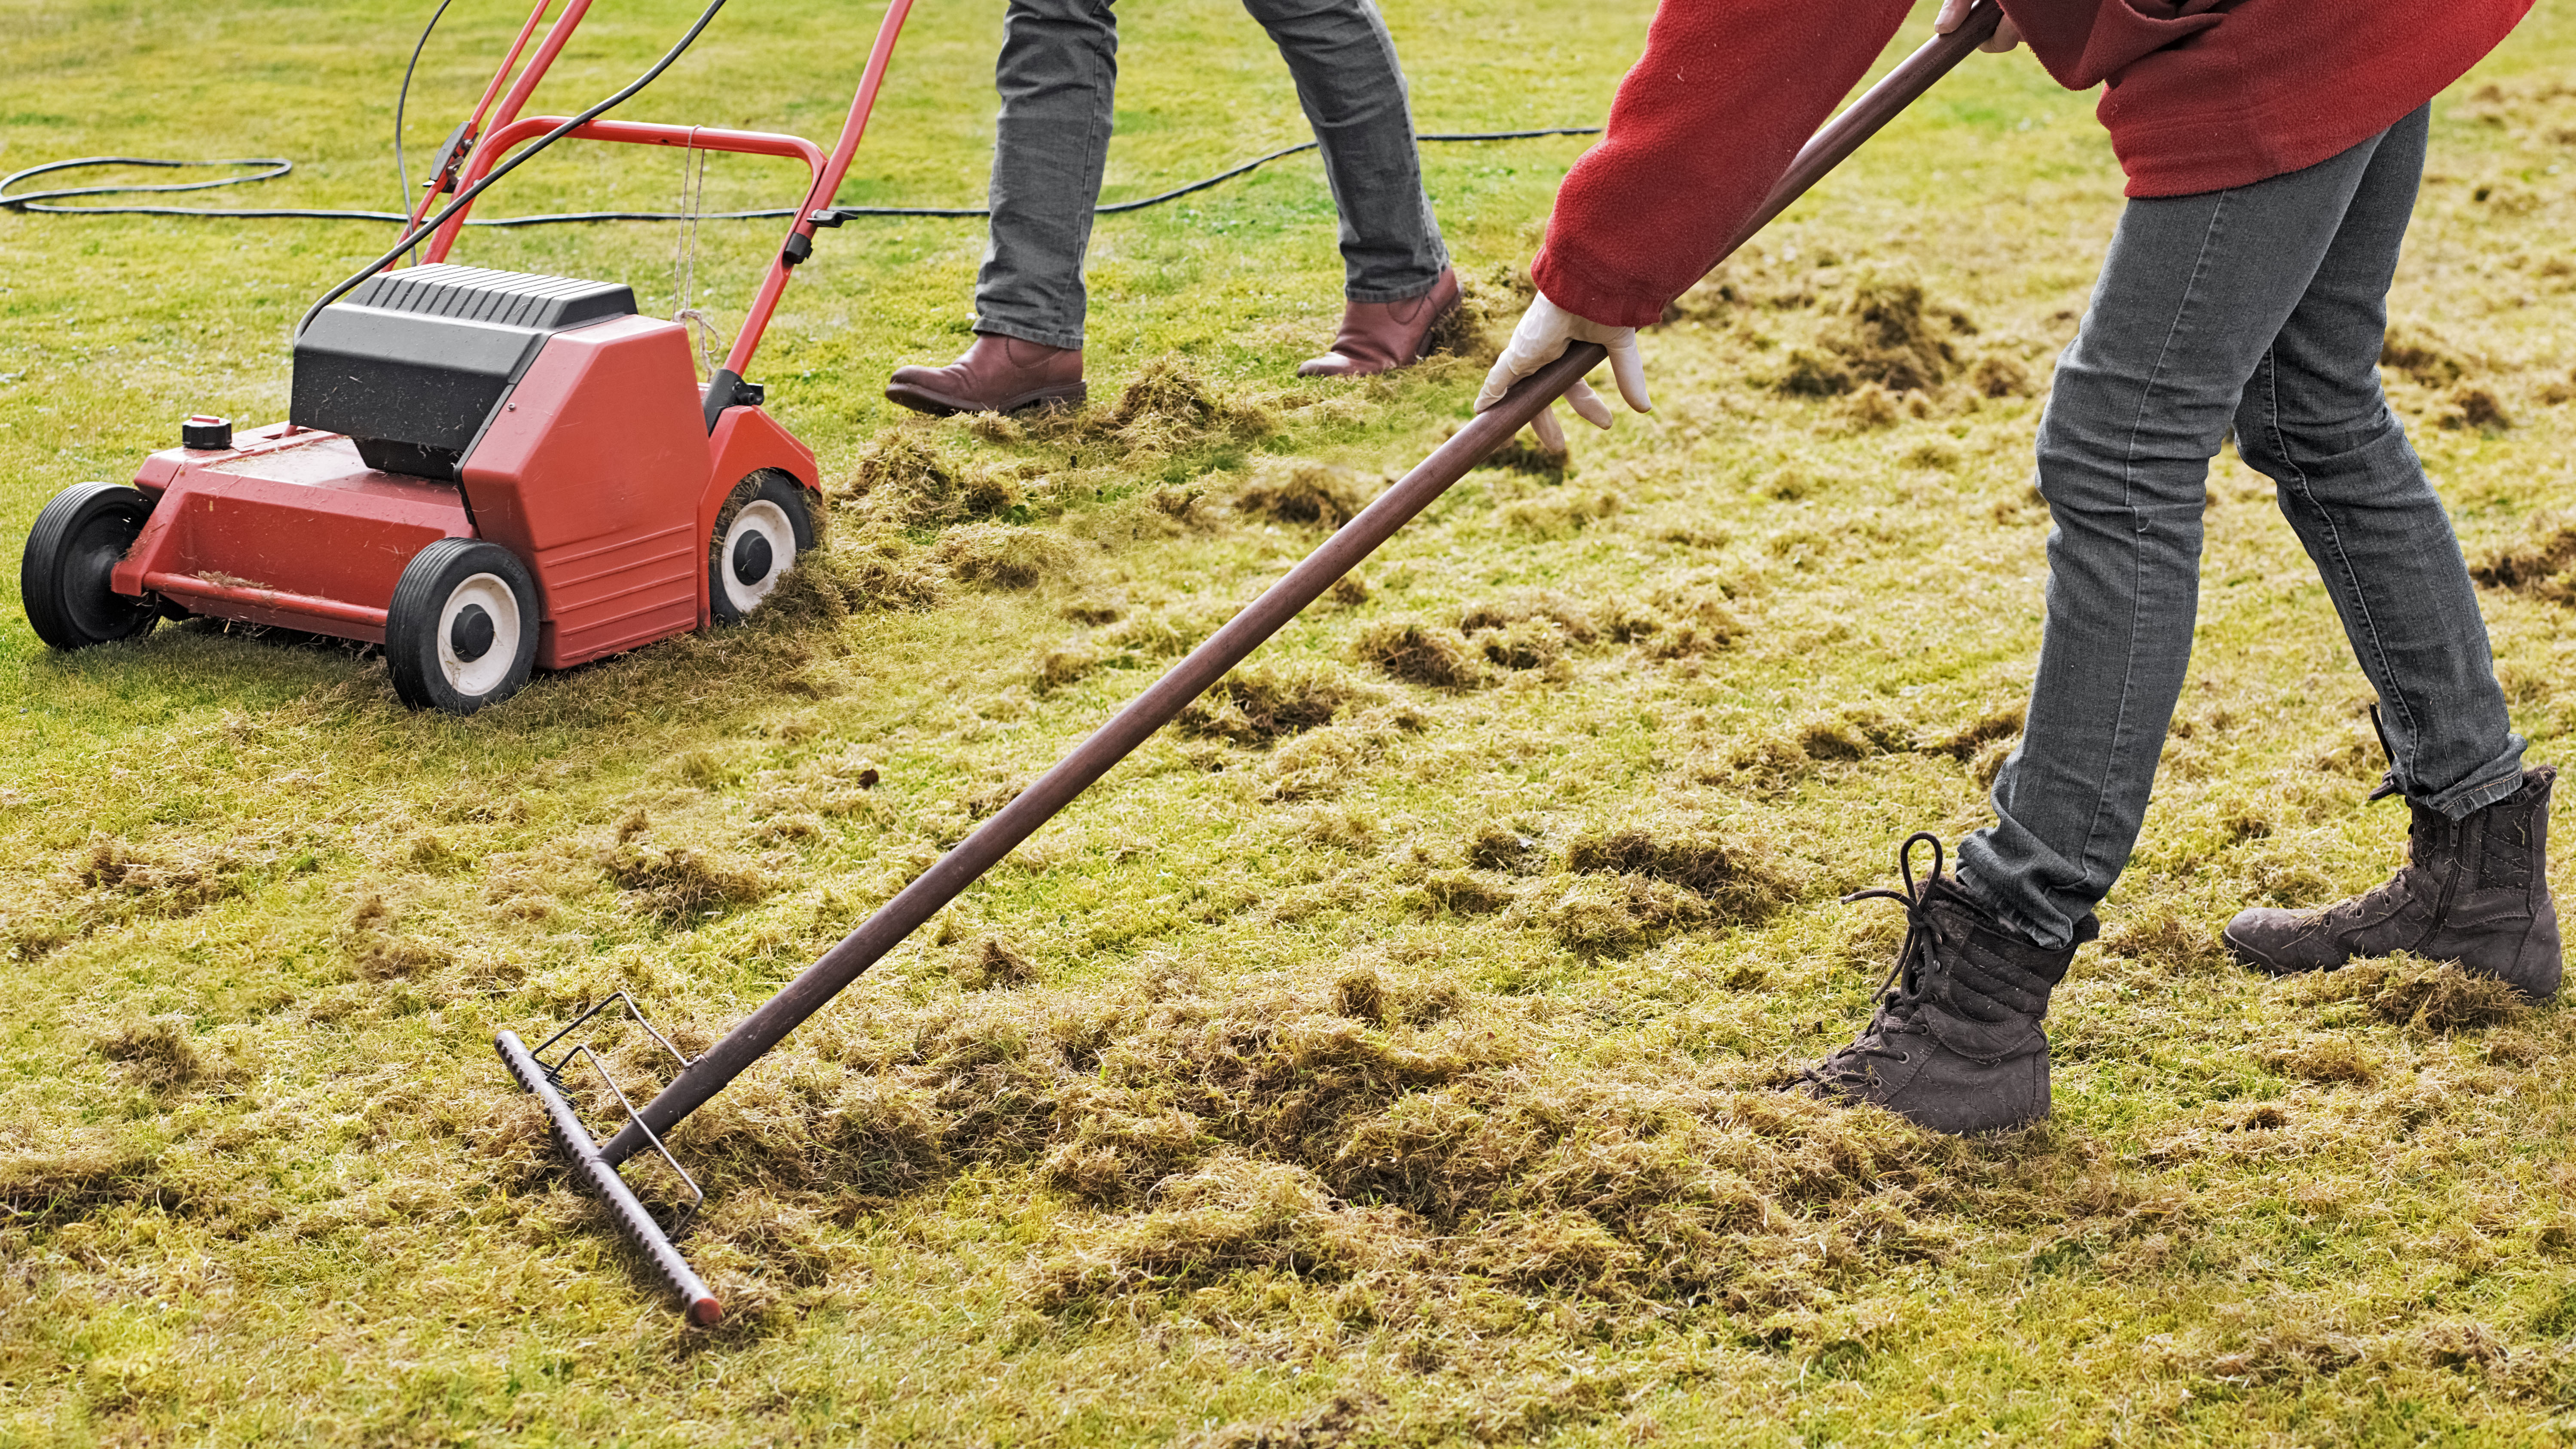 Someone using an electric aerator on the lawn while another picks up loose straw with a rake